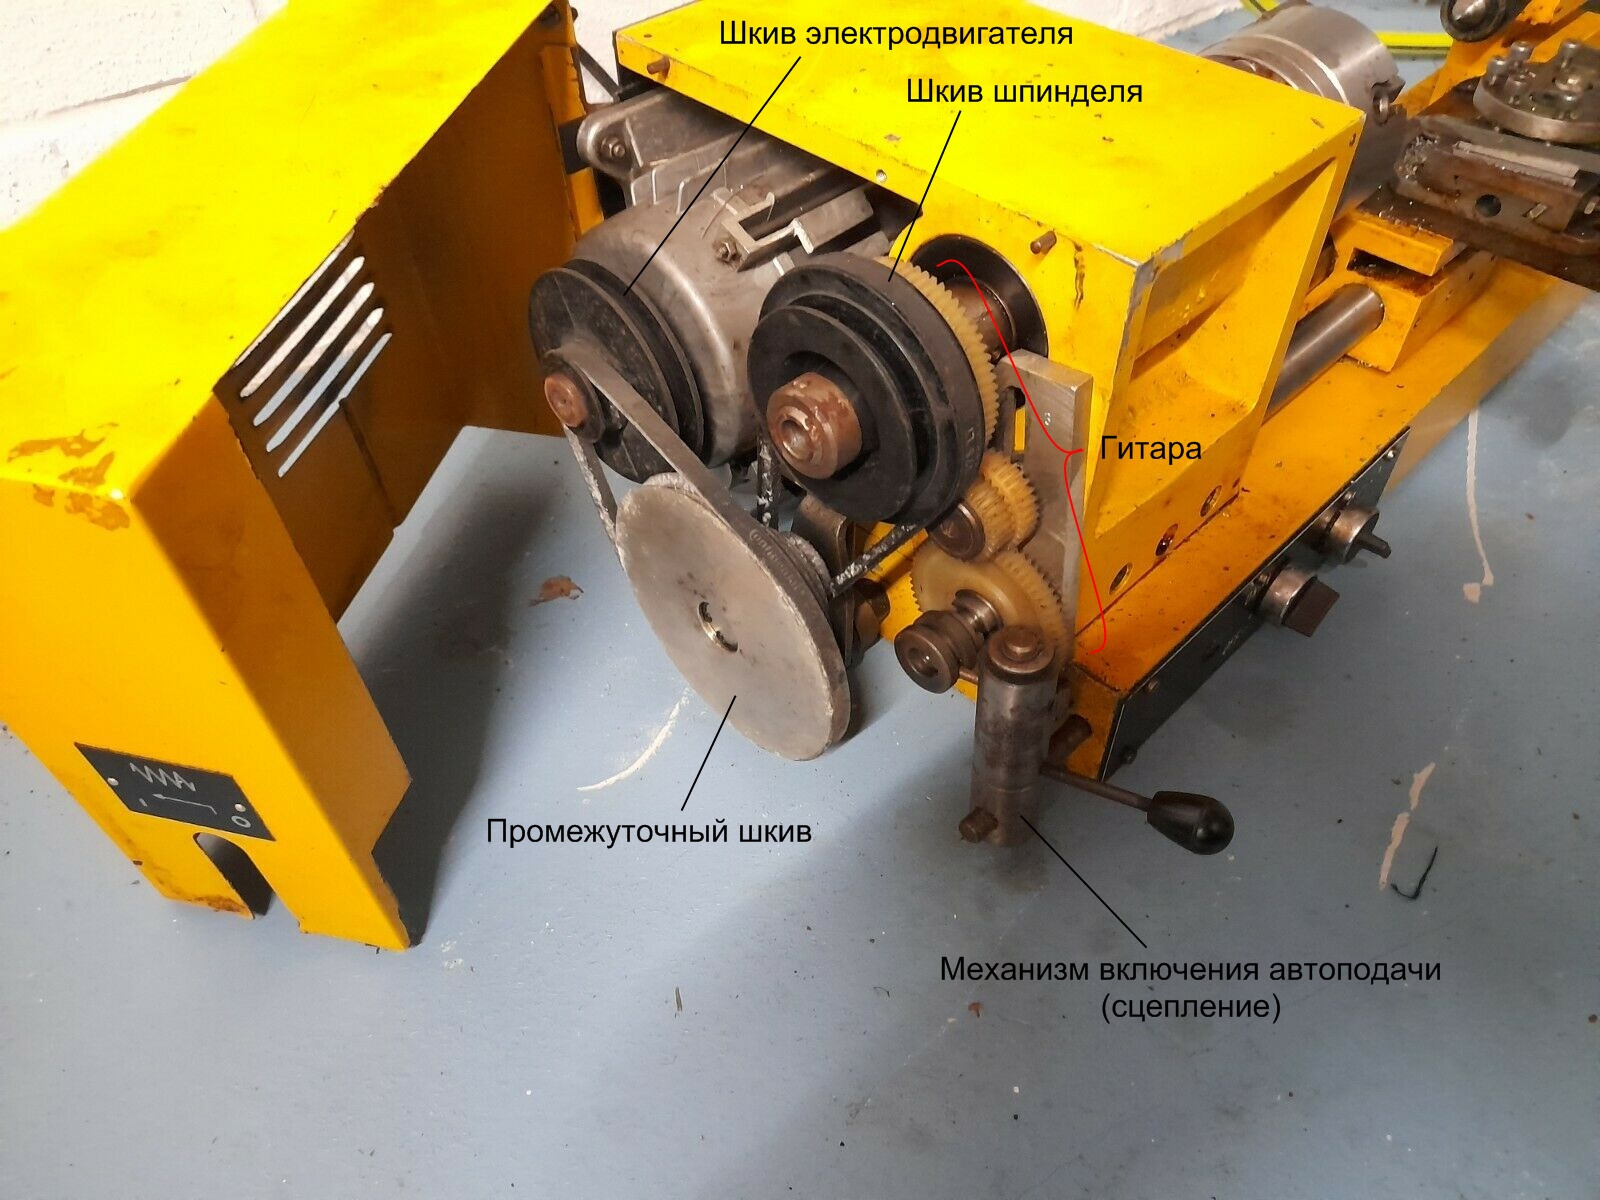 Привод MD65 (https://www.ebay.co.uk/itm/Hobbymat-MD65-lathe-in-working-order-Some-mods-With-3-and-4-jaw-chucks/393220916086?hash=item5b8dcb0376:g:0W4AAOSw8AZgXLhI)